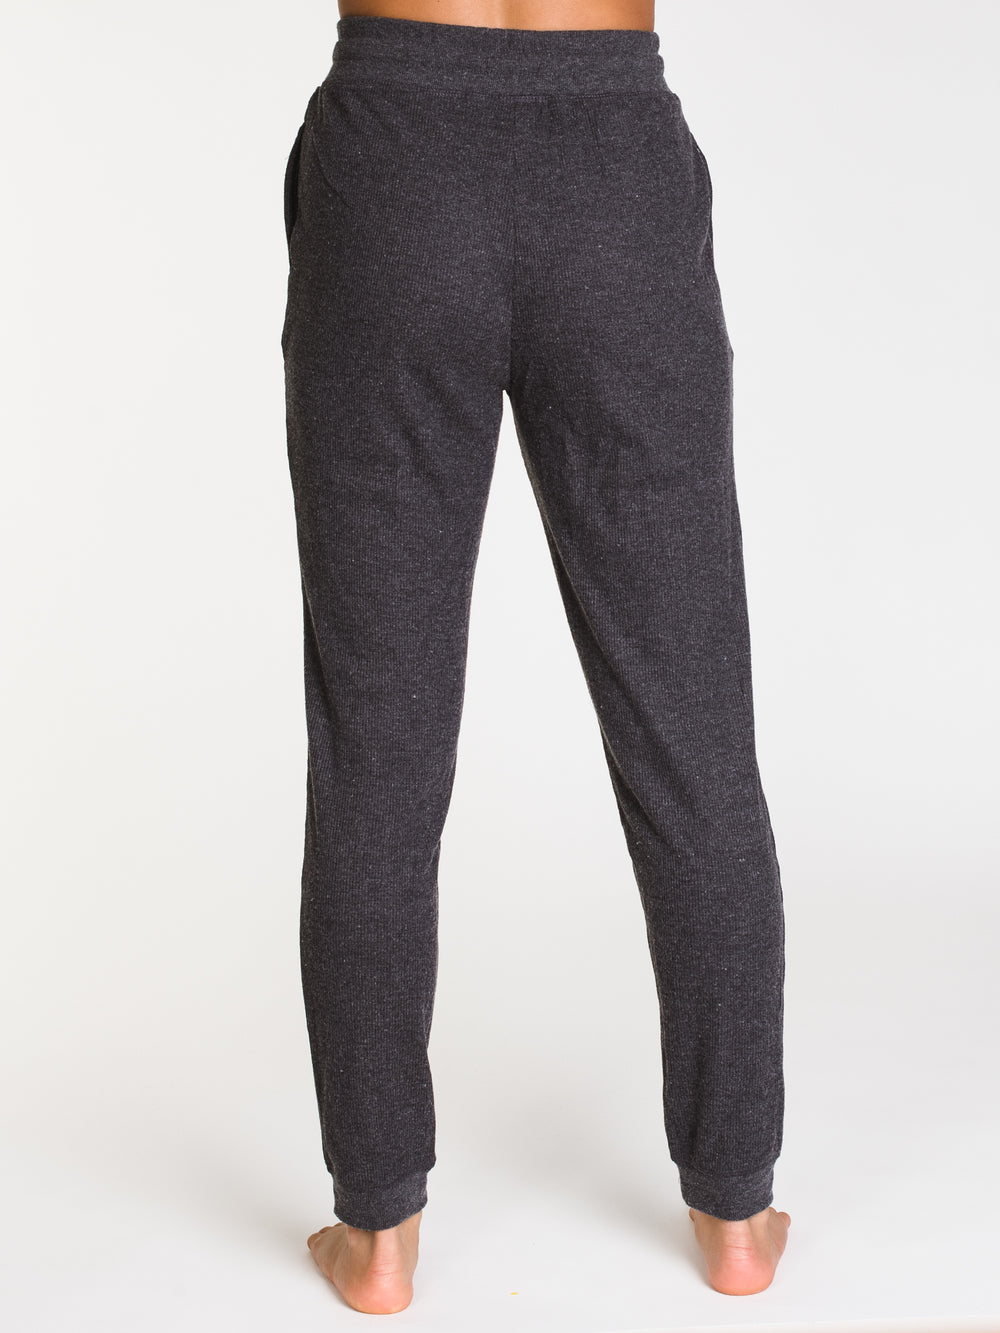 OLIVE THERMAL JOGGER - CLEARANCE